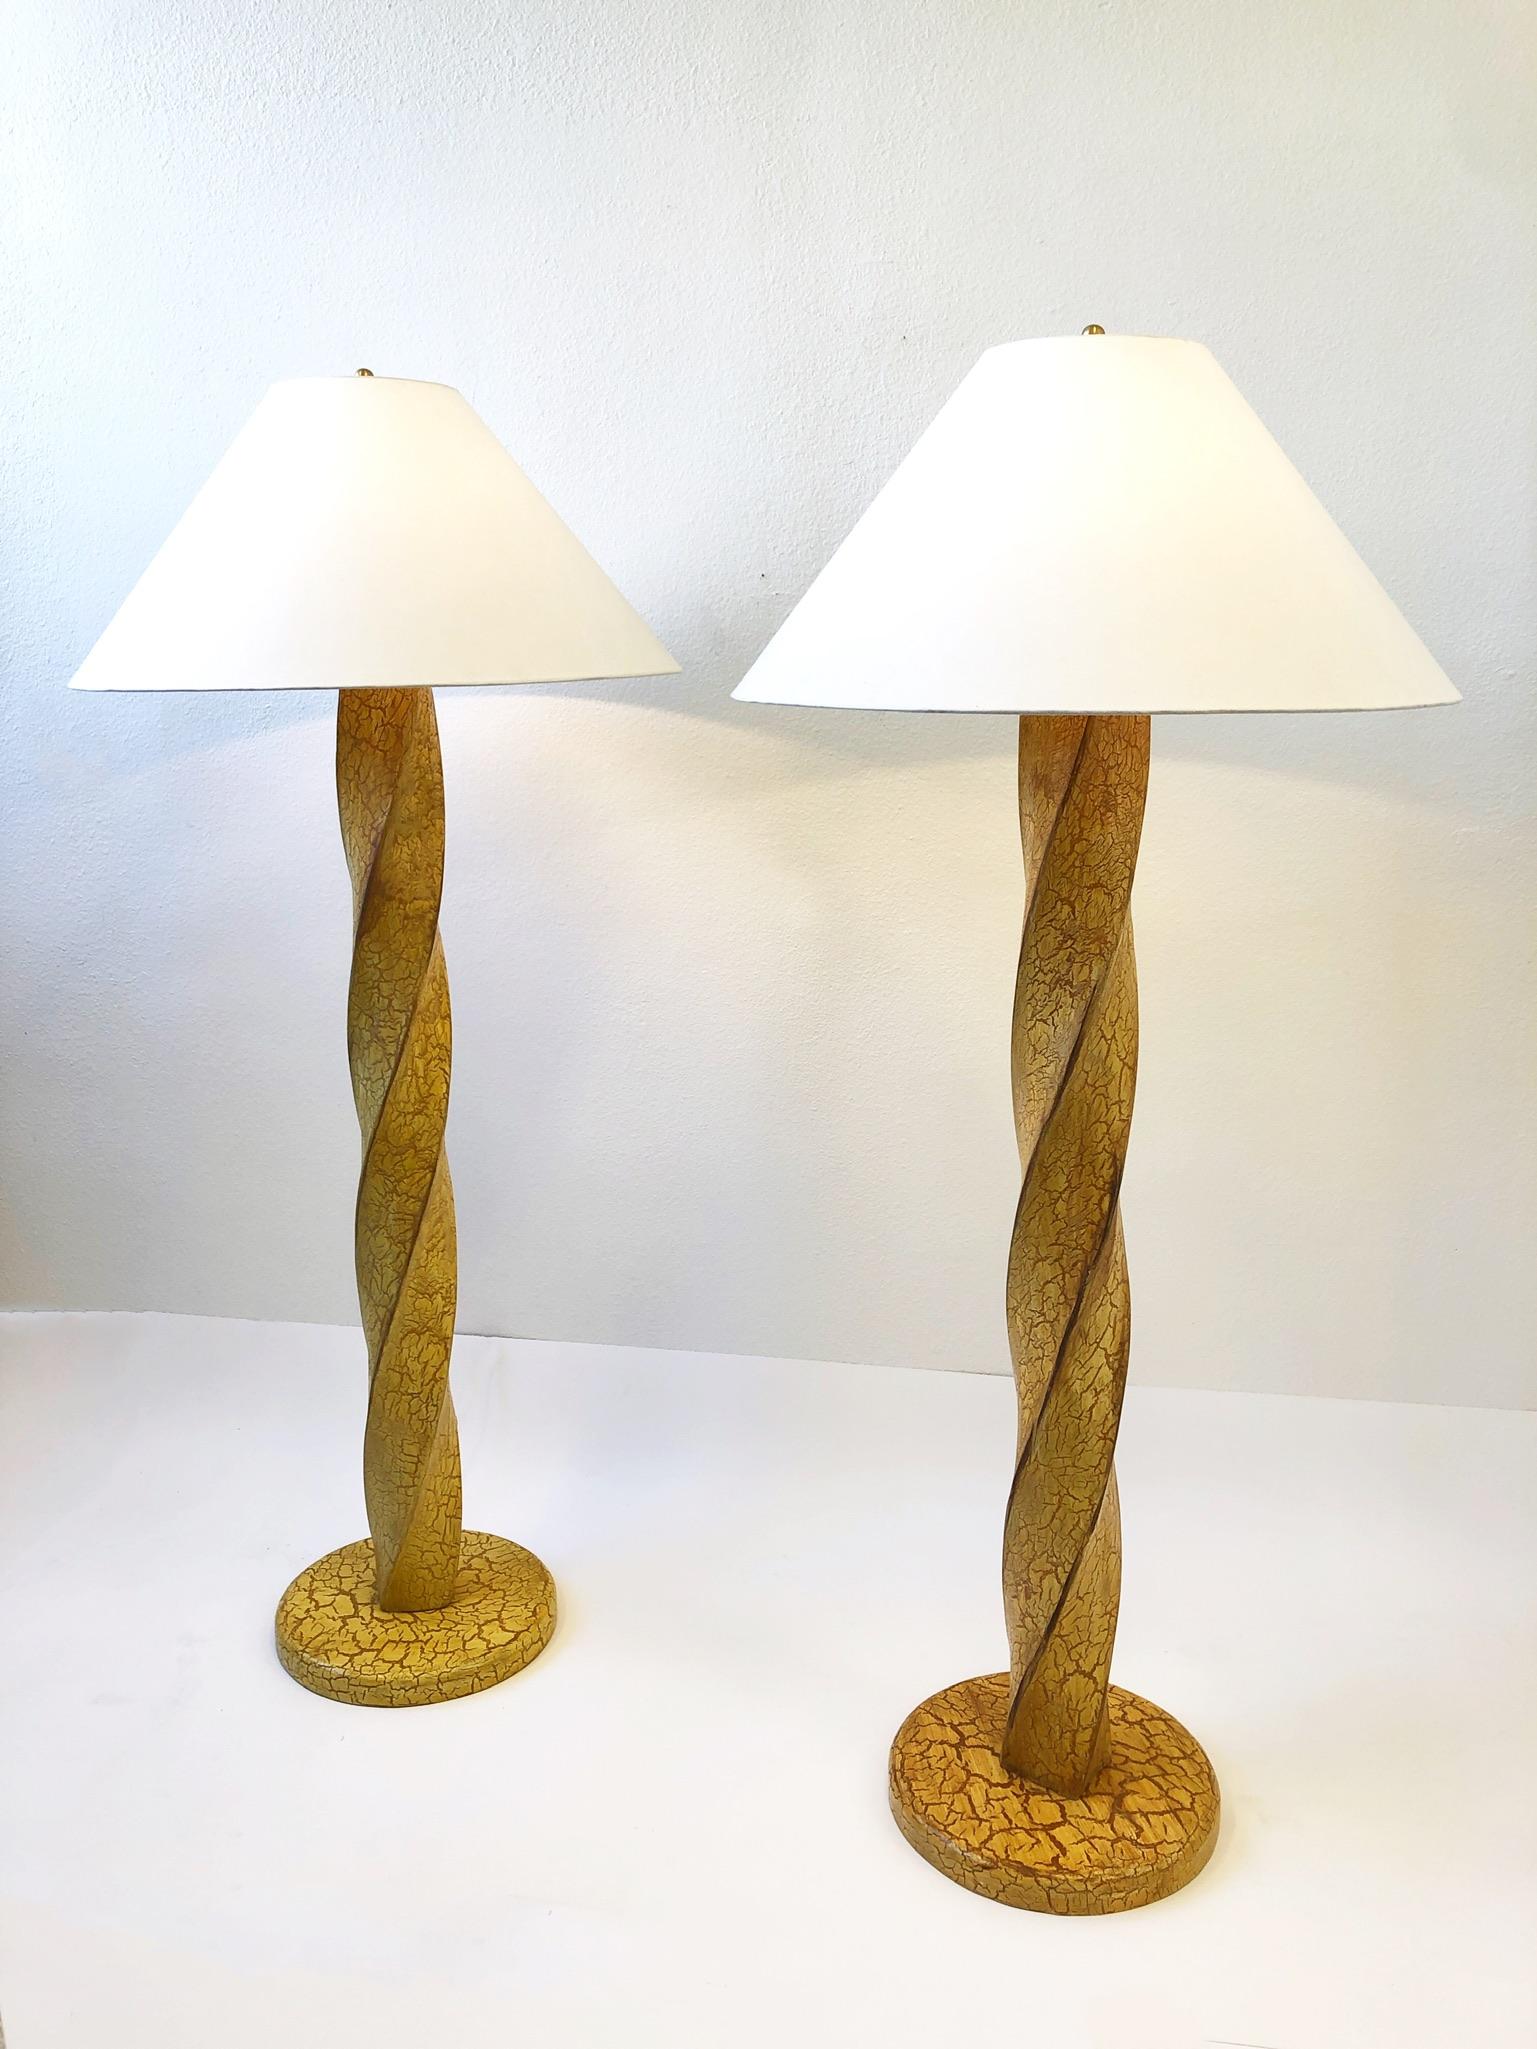 Pair of Hand Carved Wood Floor Lamps by Dana Creath Designs for Steve Chase 6